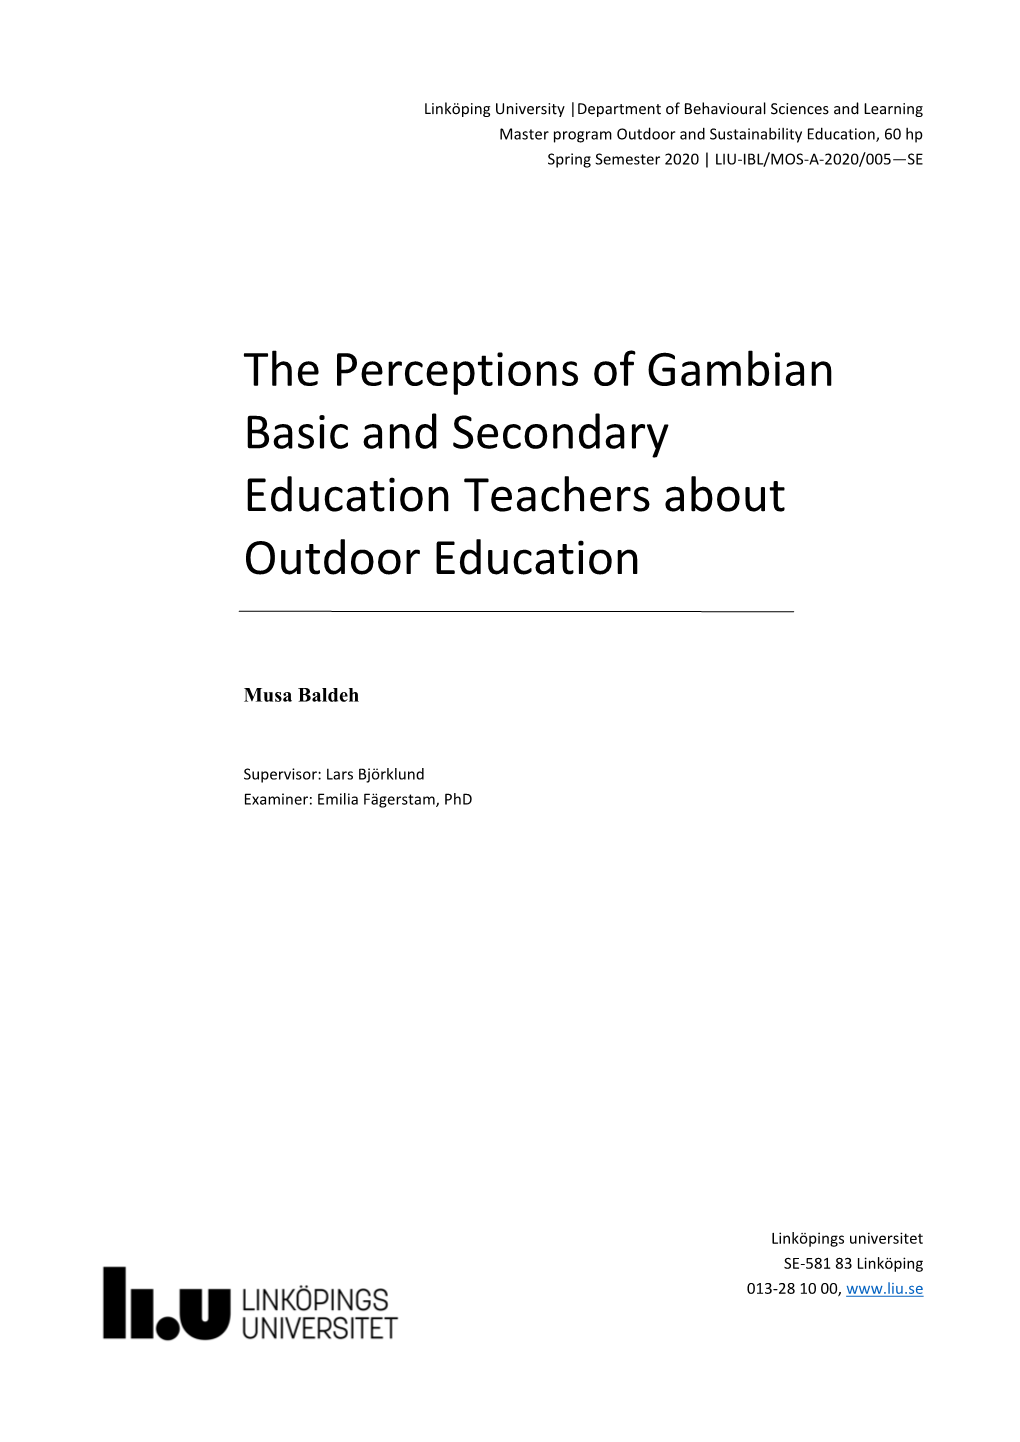 The Perceptions of Gambian Basic and Secondary Education Teachers About Outdoor Education